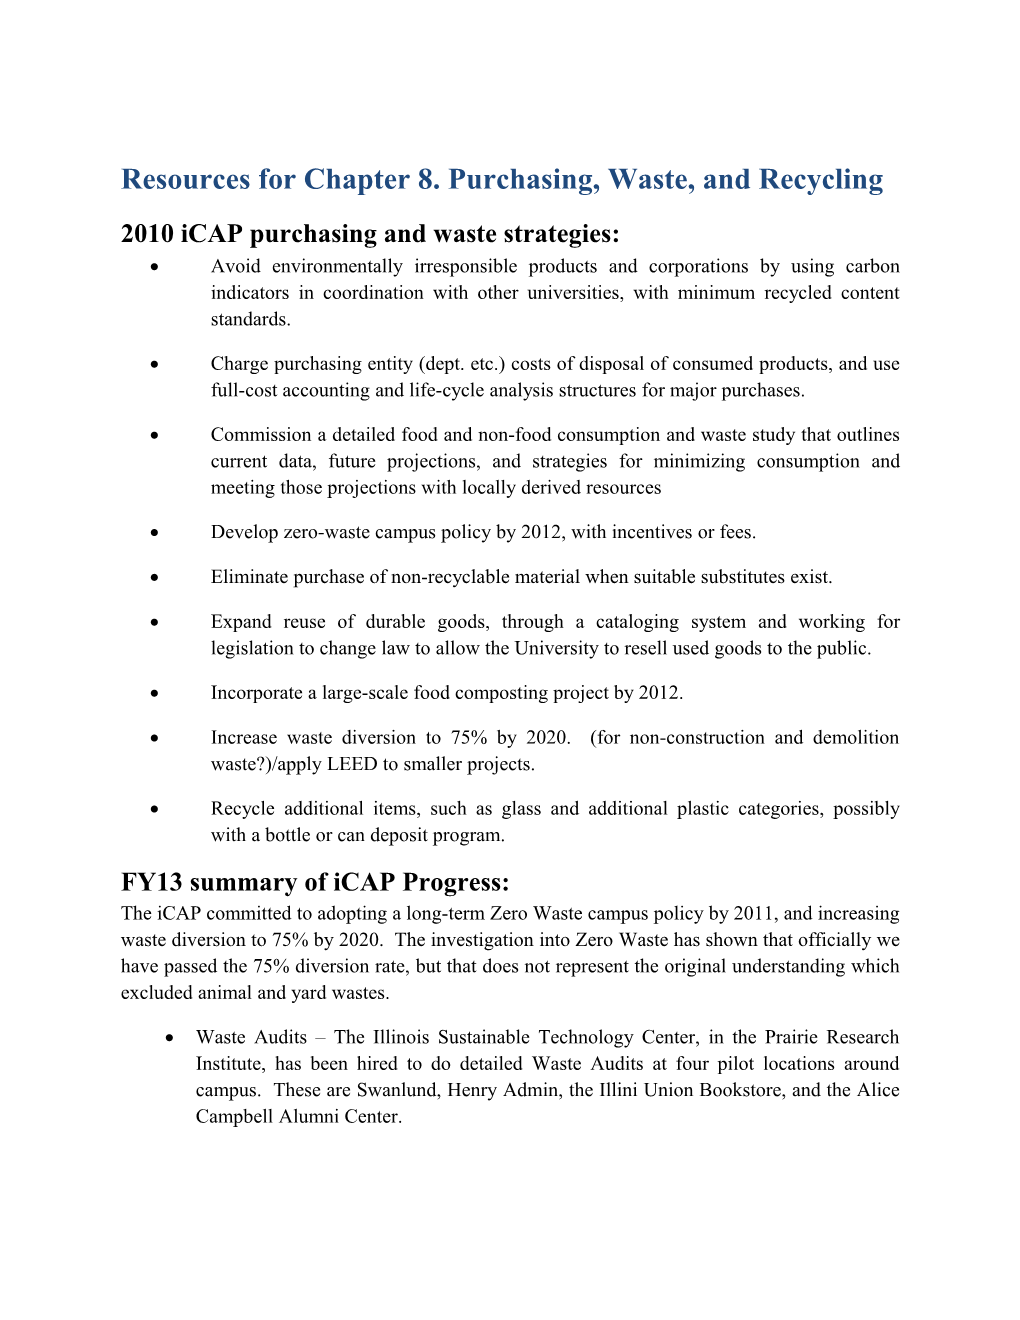 Resources for Chapter 8.Purchasing, Waste, and Recycling